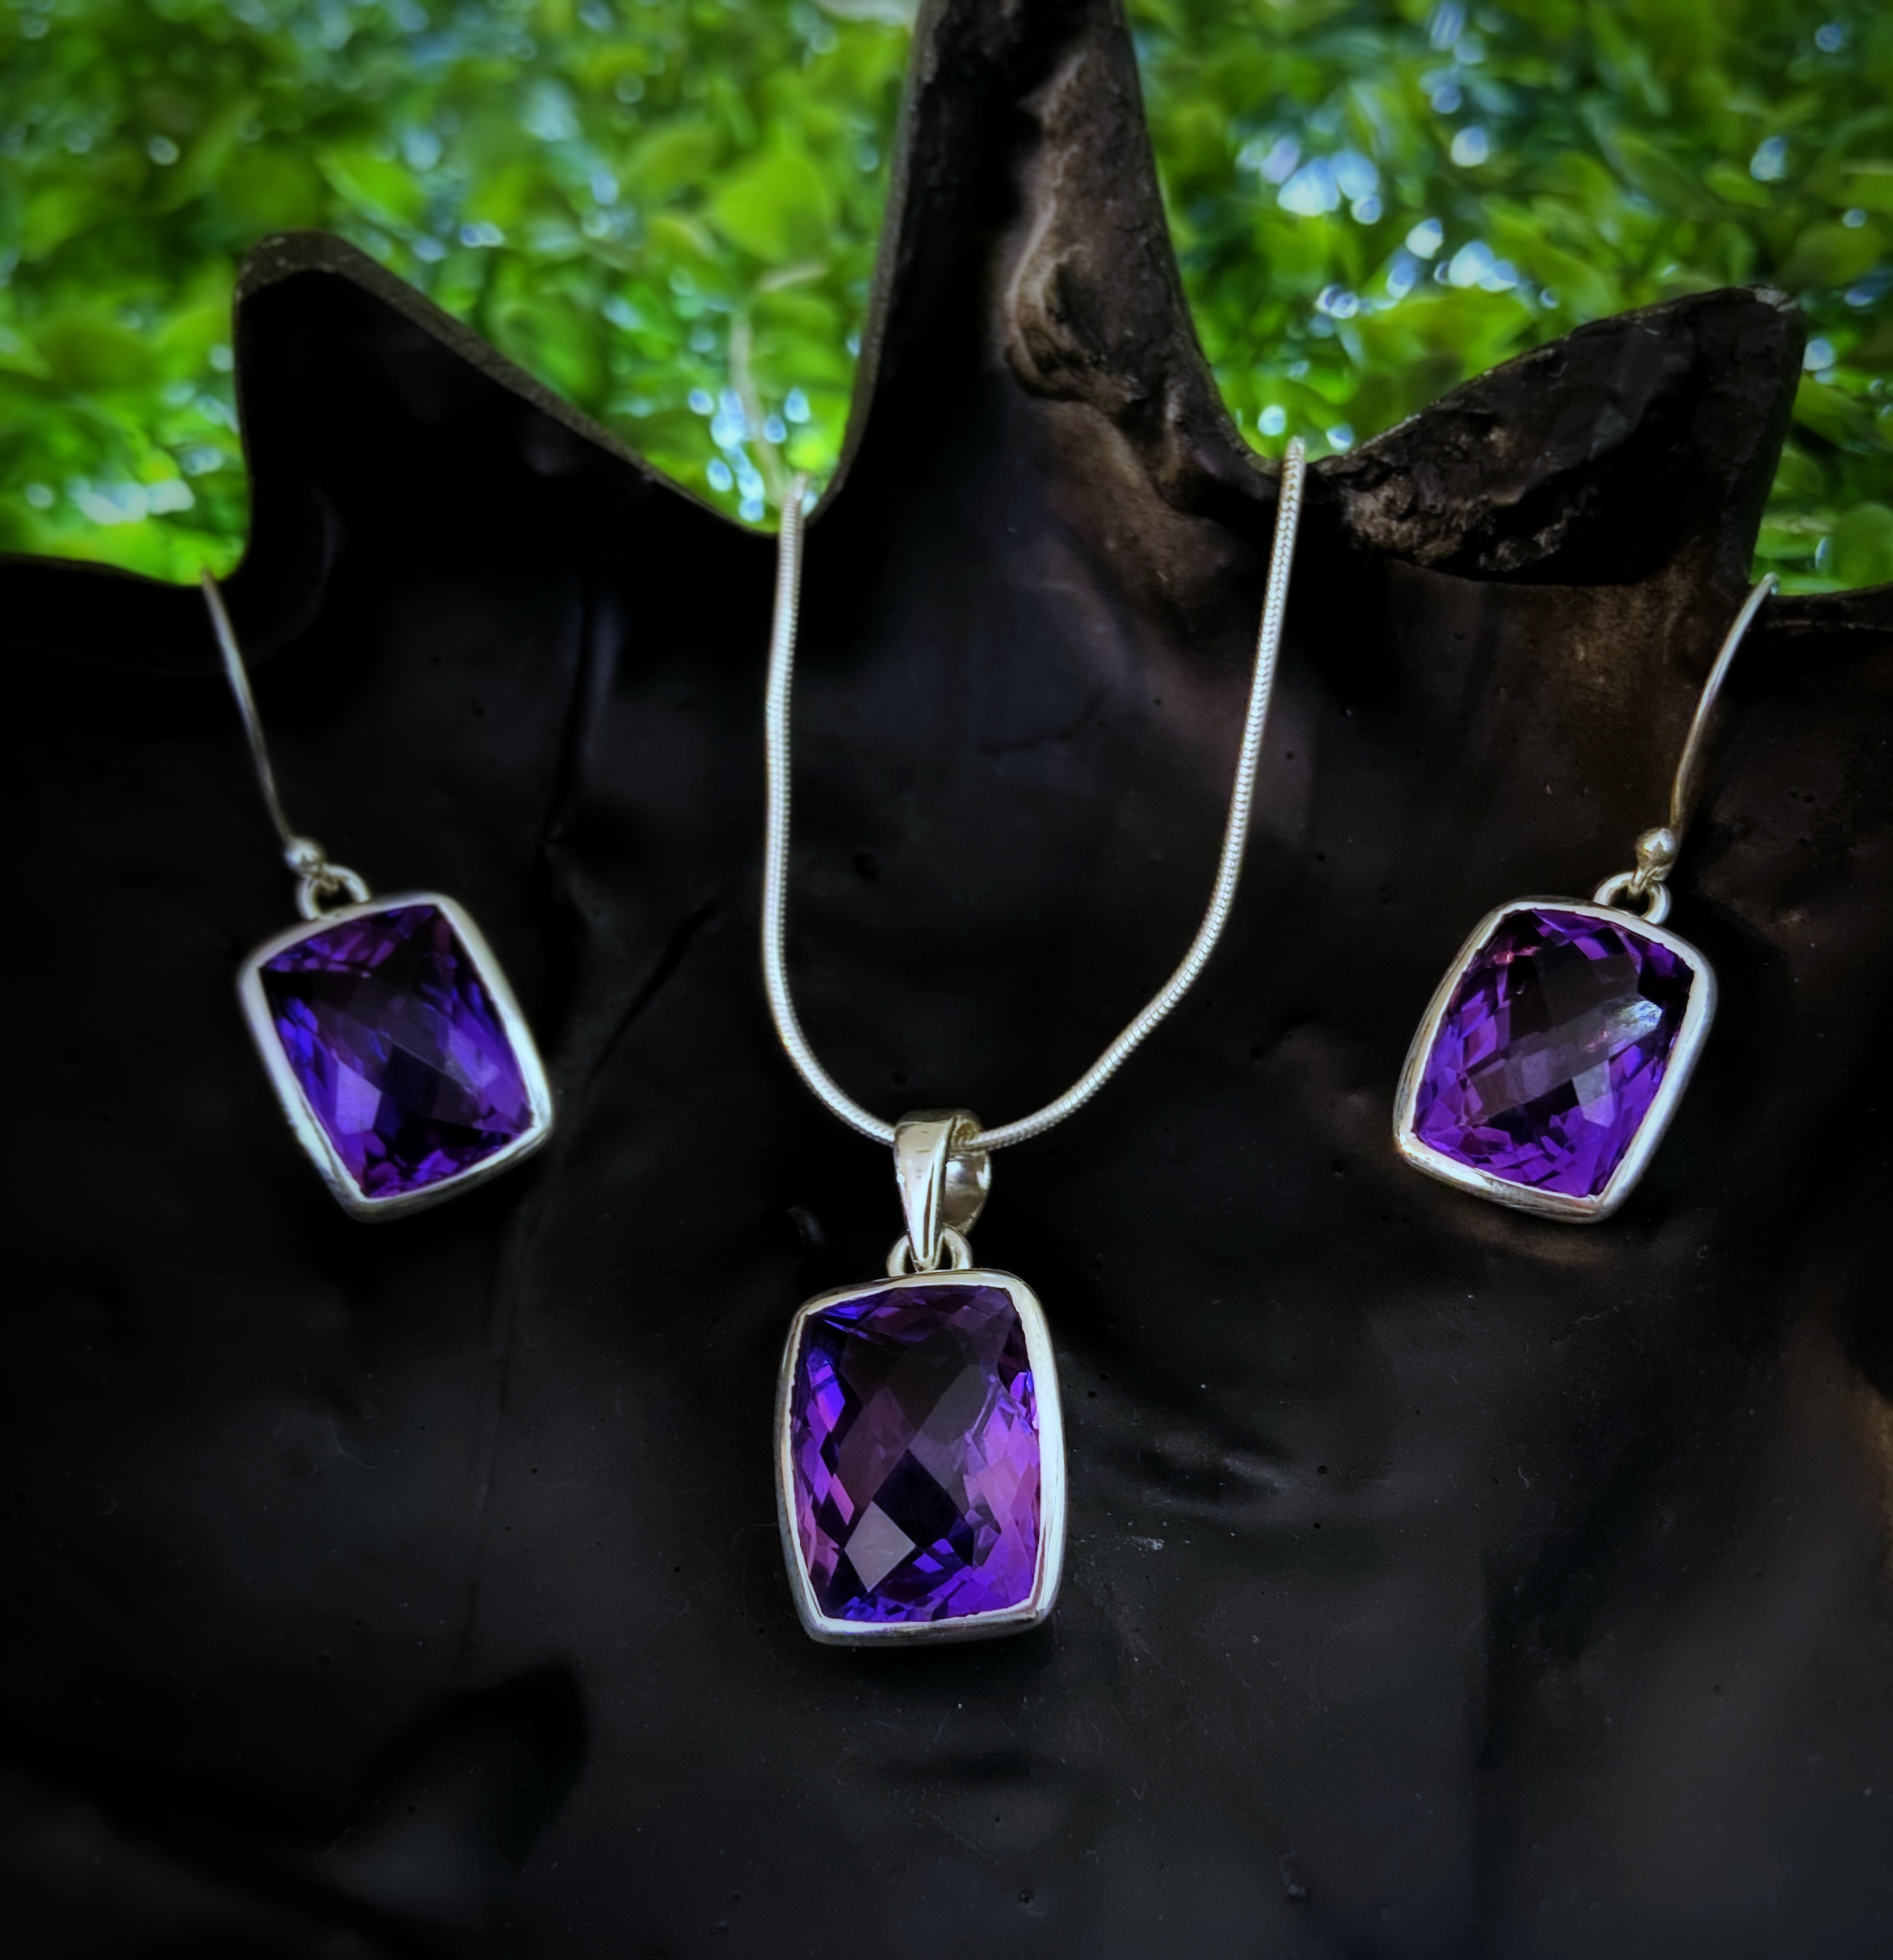 Natural Amethyst Sterling Silver Pendant